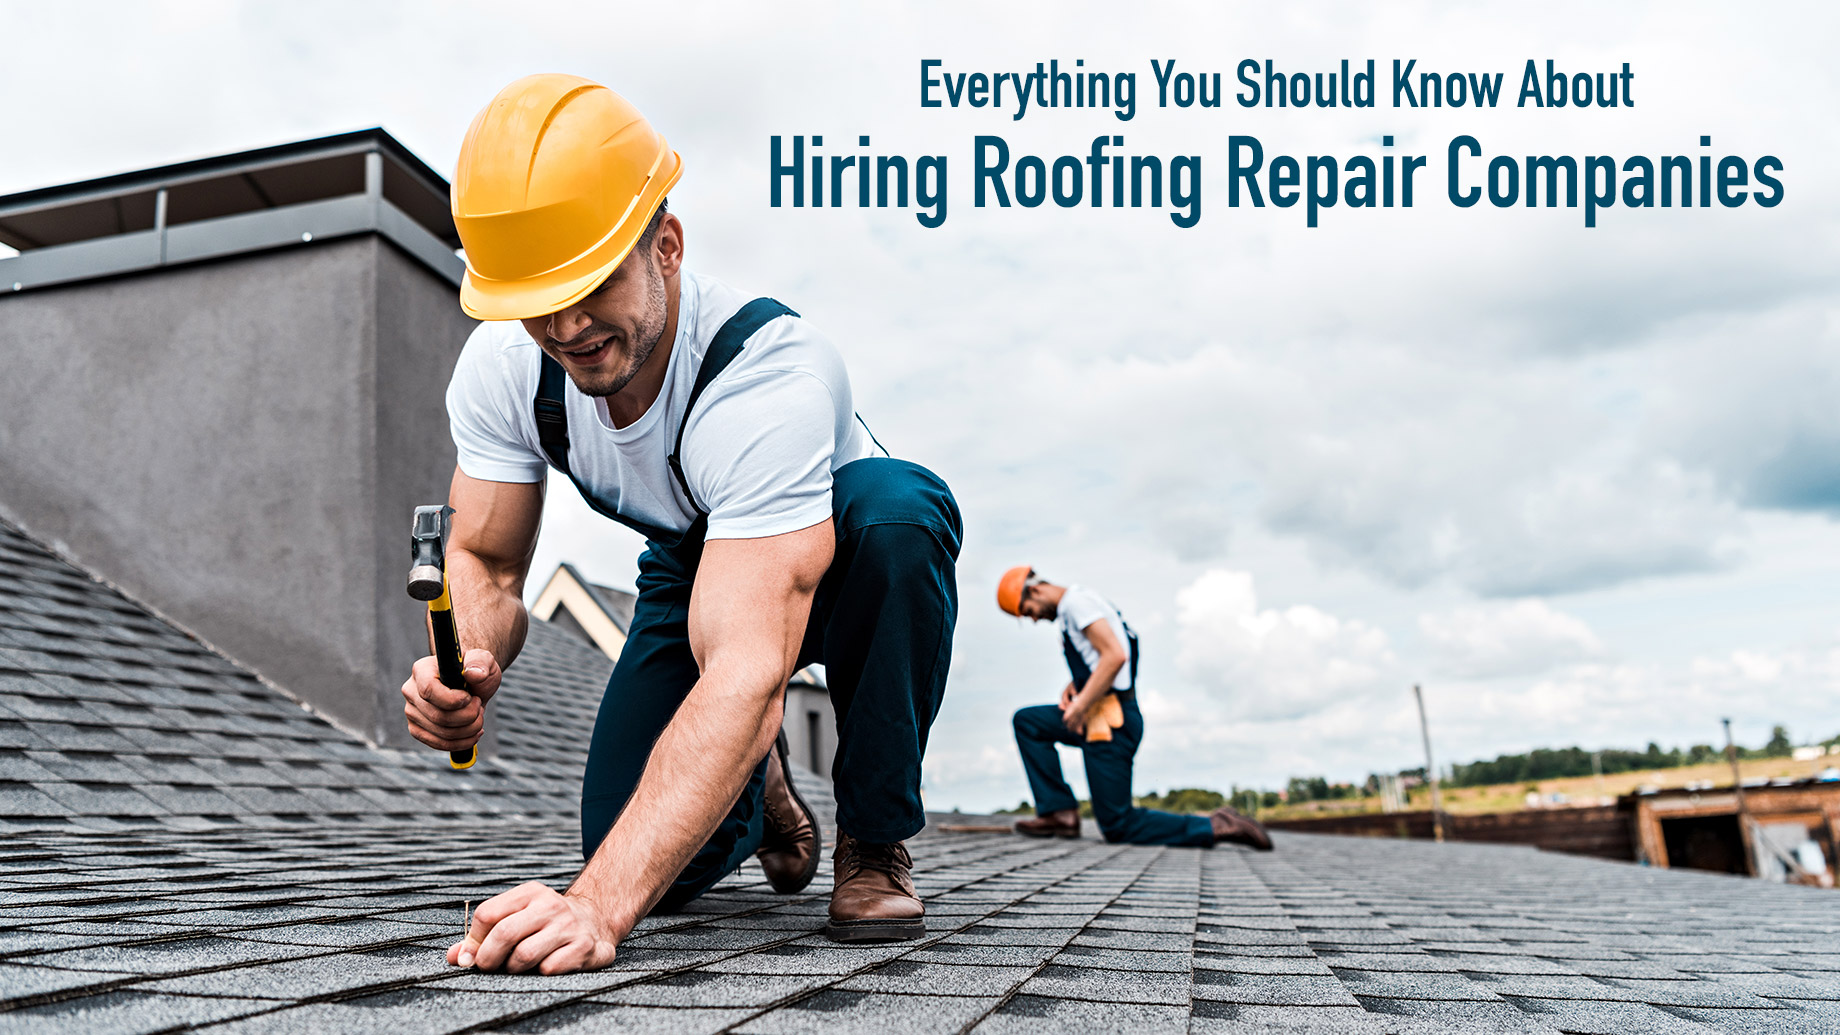 Everything You Should Know About Hiring Roofing Repair Companies